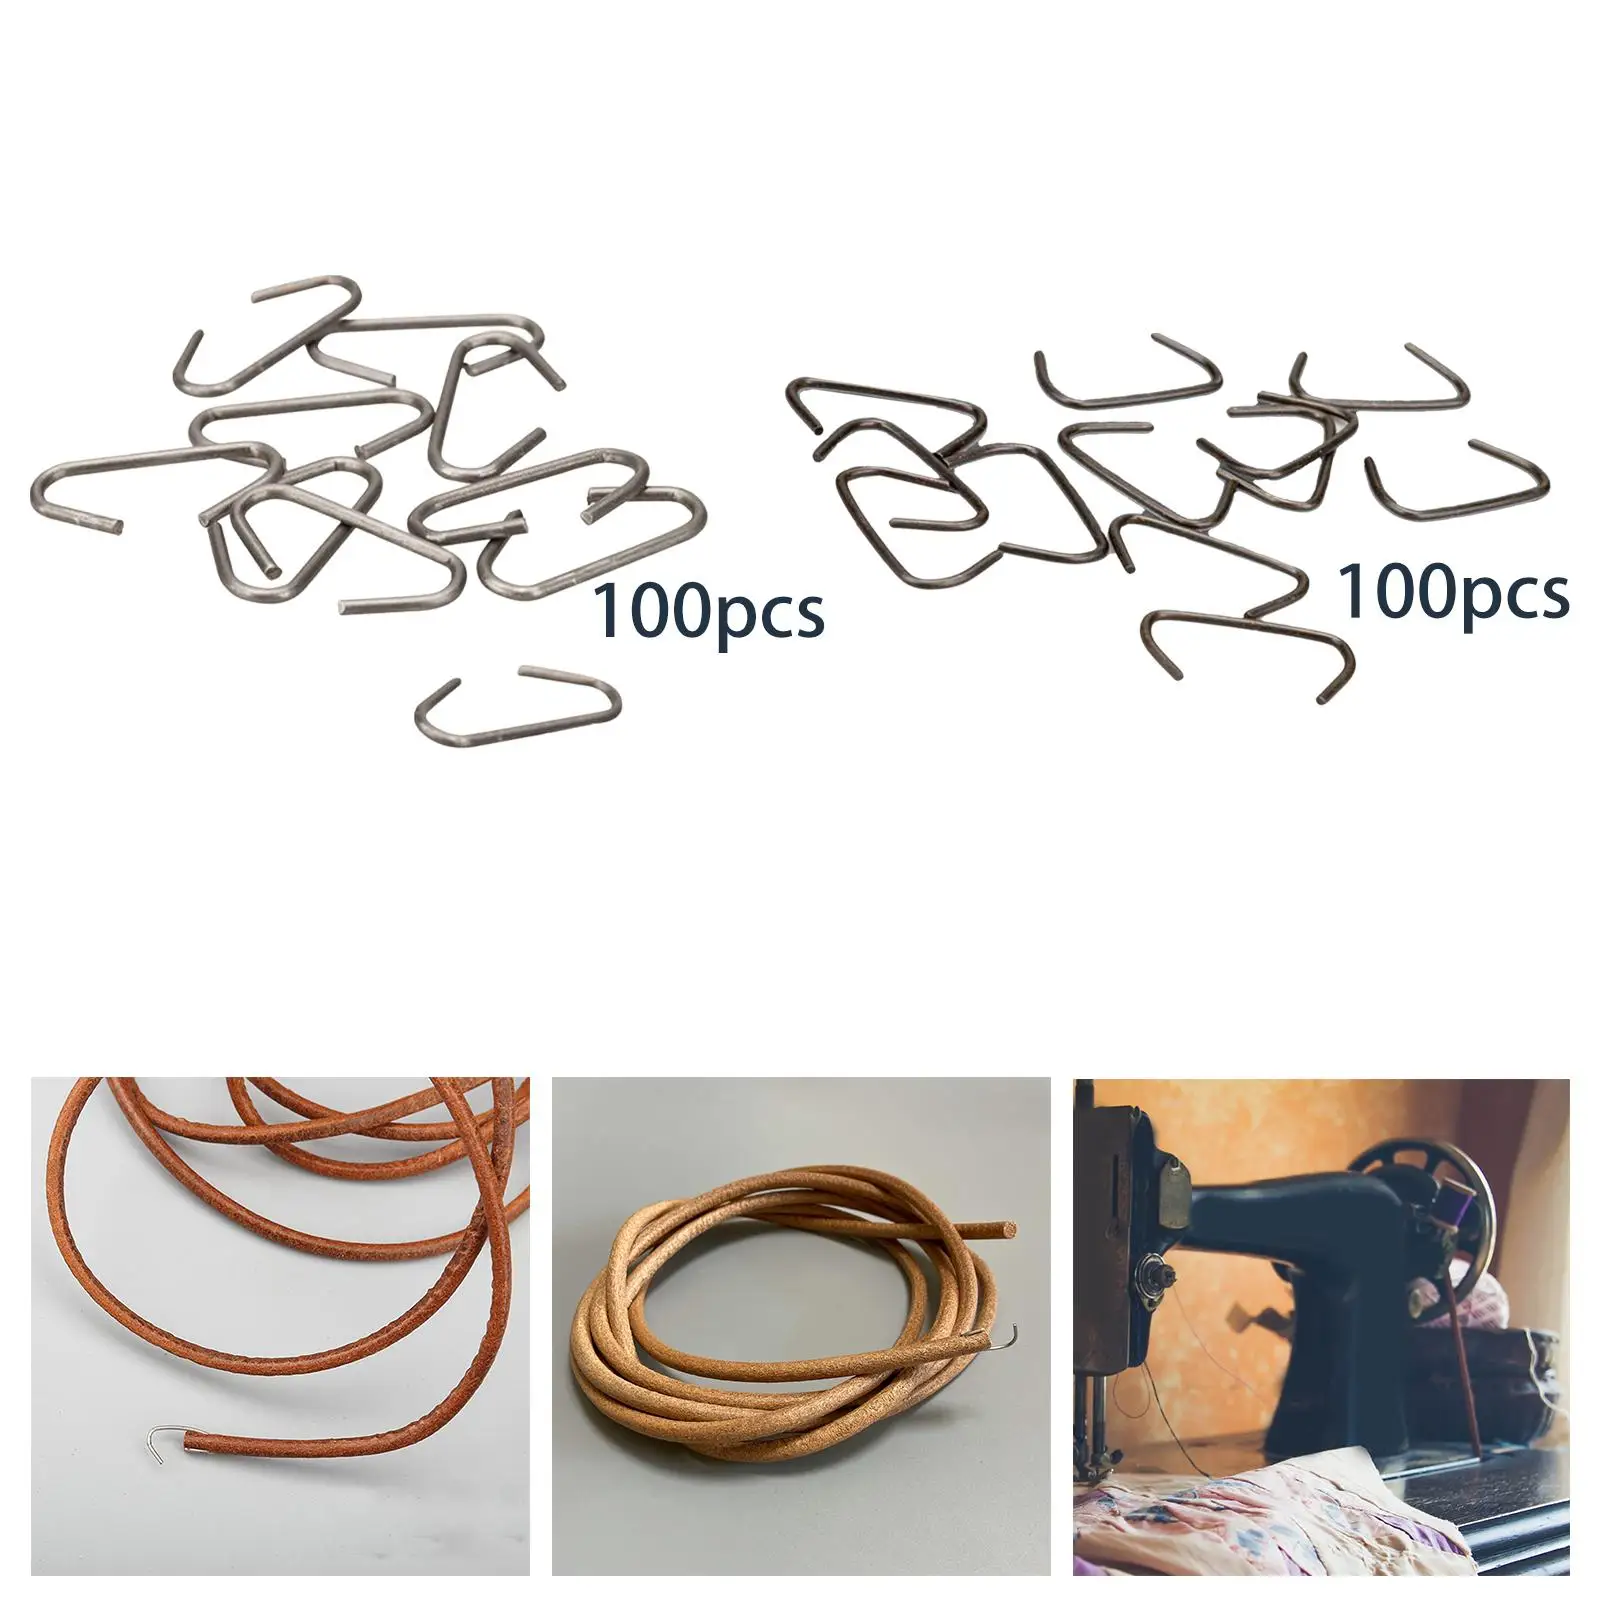 100 Pack Sewing Machine Belt Hook Steel Easy to Install Durable Leather Belt Hooks for Jones Old Style Sewing Machine Singer